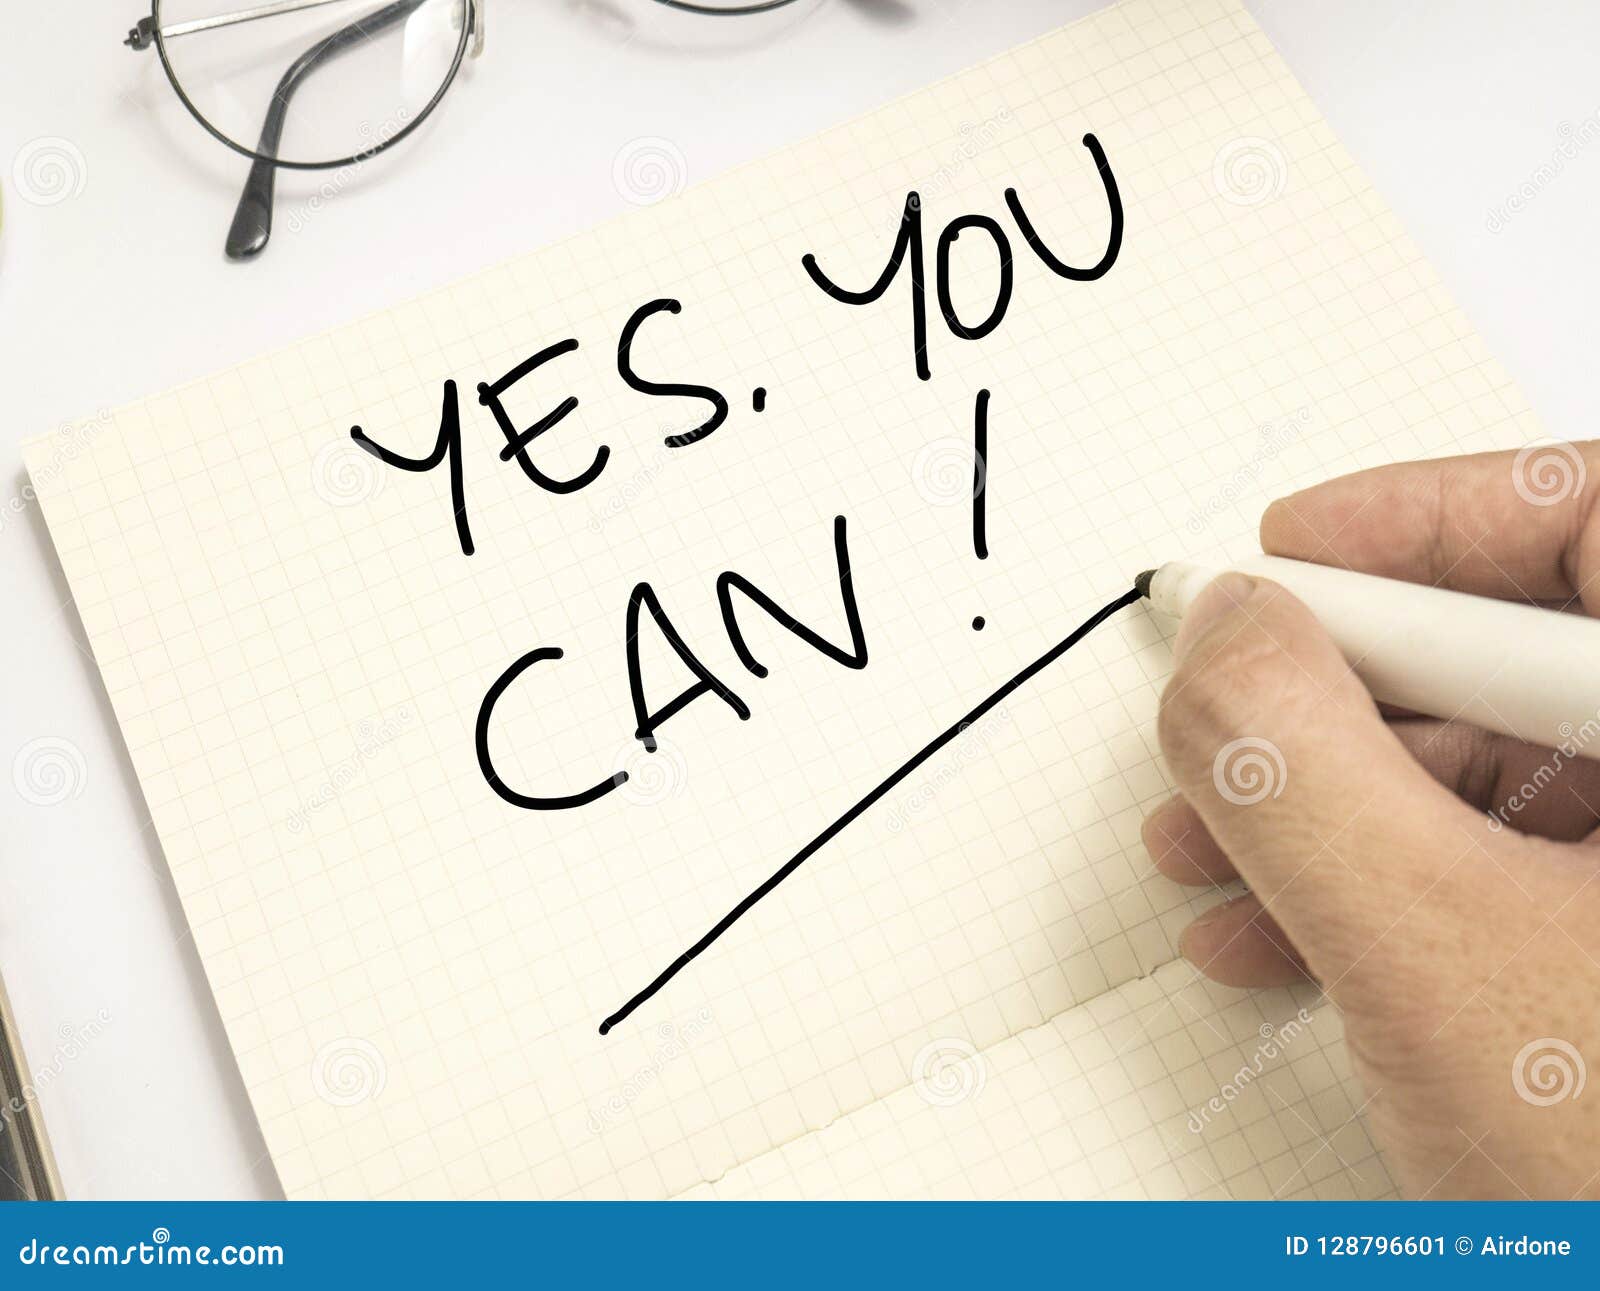 Yes You Can Motivational Words Quotes Concept Stock Image Image Of Motivation Inspiration